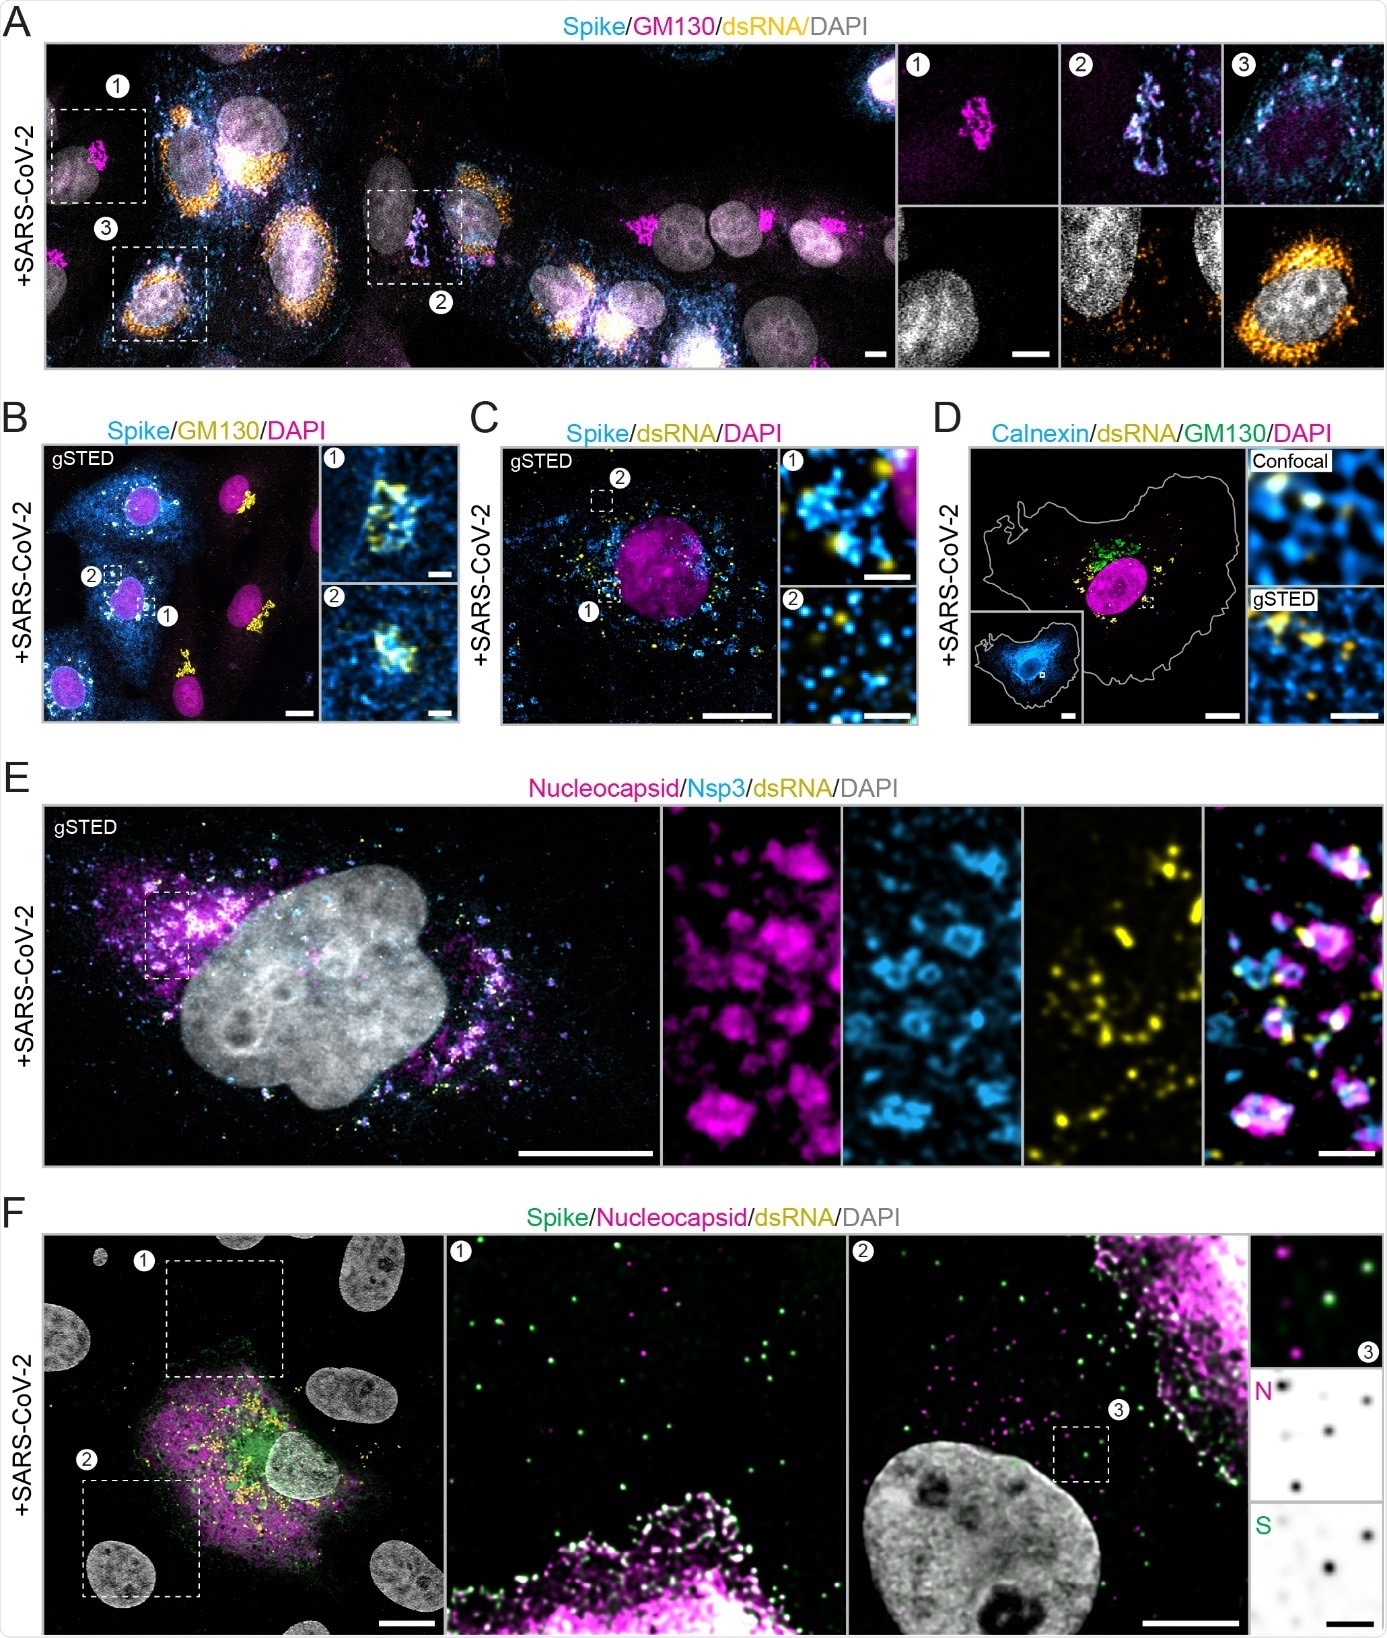 Nanoscopic visualization of the SARS-CoV-2 infection cycle in Vero E6 cells